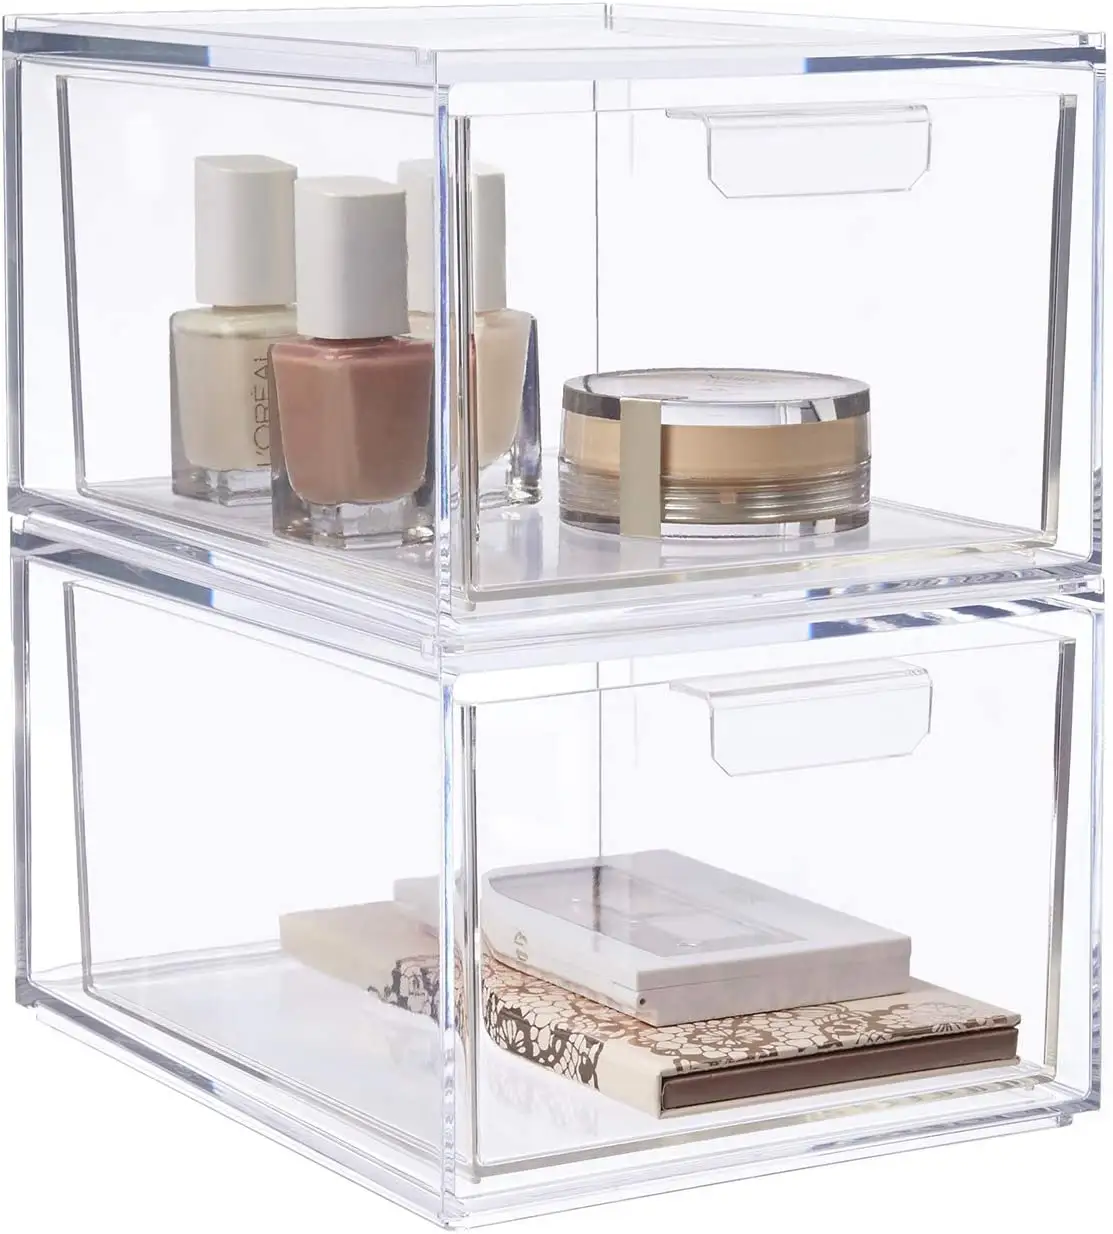 Super September New Design cosmetic jewelry storage case display box with drawers counter makeup storage organizer